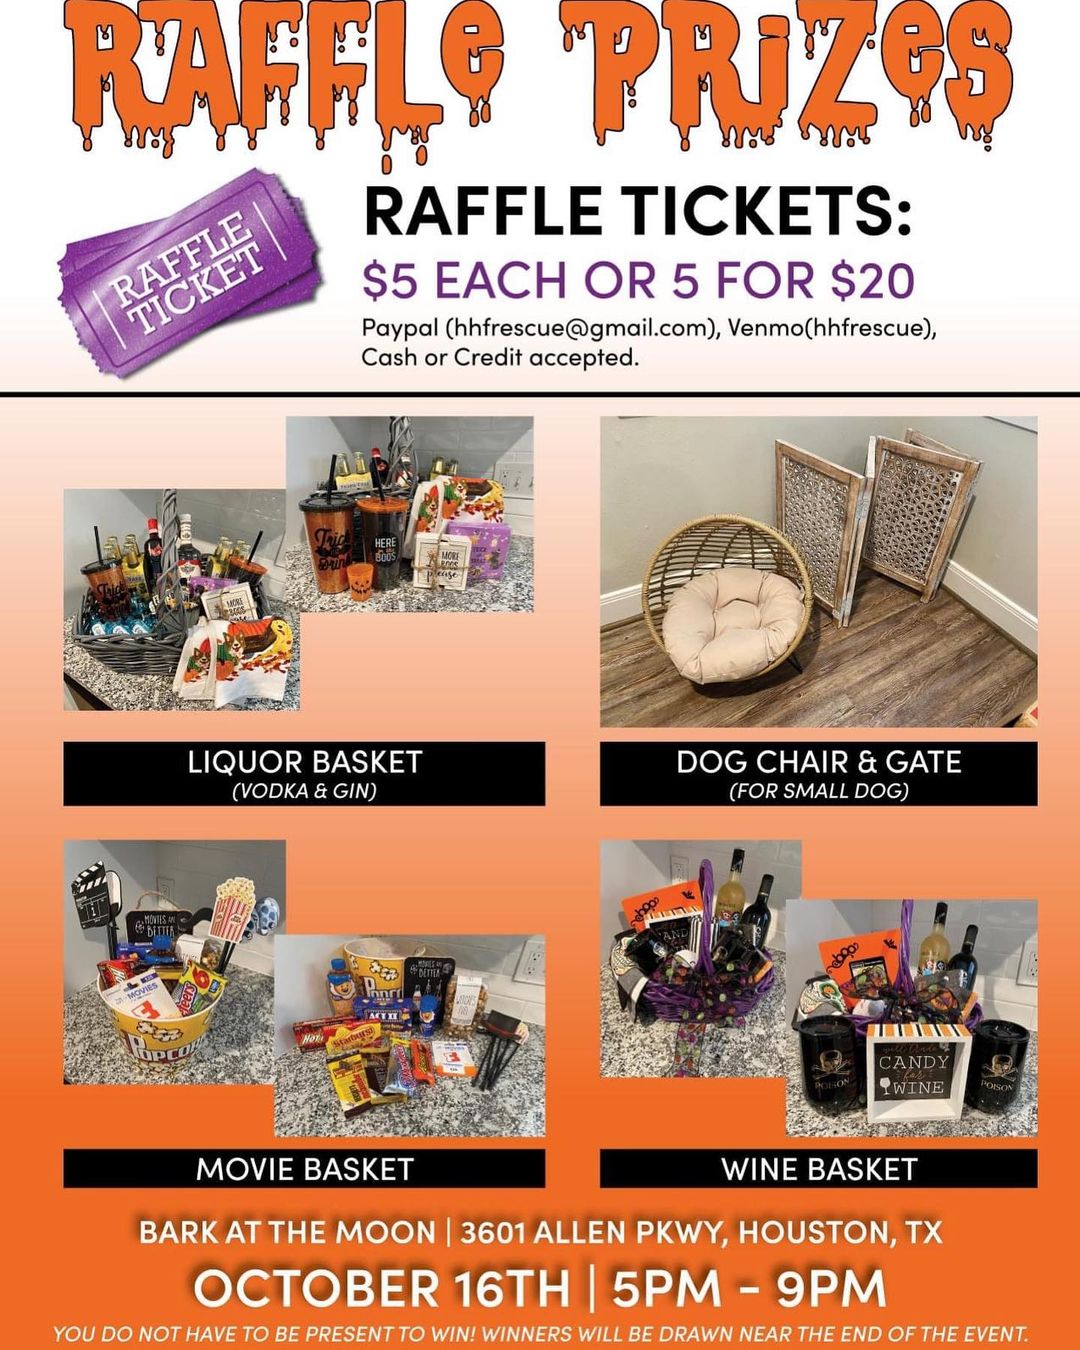 We are now preselling raffle tickets for the Bark at the Moon event this Sat, October 16th! You do NOT have to be present at the event to win! Raffle tickets are $5 each or 5 for $20. If you pay via PayPal or Venmo, please put your phone # and the item you want to try and win. Winners will be drawn towards the end of the event. All funds raised will help the rescue pay some medical and boarding expenses. We appreciate your support and hope to see you at the event! <a target='_blank' href='https://www.instagram.com/explore/tags/hhfr/'>#hhfr</a> <a target='_blank' href='https://www.instagram.com/explore/tags/pawzup/'>#pawzup</a> <a target='_blank' href='https://www.instagram.com/explore/tags/barkatthemoon/'>#barkatthemoon</a> <a target='_blank' href='https://www.instagram.com/explore/tags/fundraiser/'>#fundraiser</a> <a target='_blank' href='https://www.instagram.com/explore/tags/supportrescue/'>#supportrescue</a> <a target='_blank' href='https://www.instagram.com/explore/tags/dogrescue/'>#dogrescue</a> <a target='_blank' href='https://www.instagram.com/explore/tags/adoptdontshop/'>#adoptdontshop</a> <a target='_blank' href='https://www.instagram.com/explore/tags/Houston/'>#Houston</a>